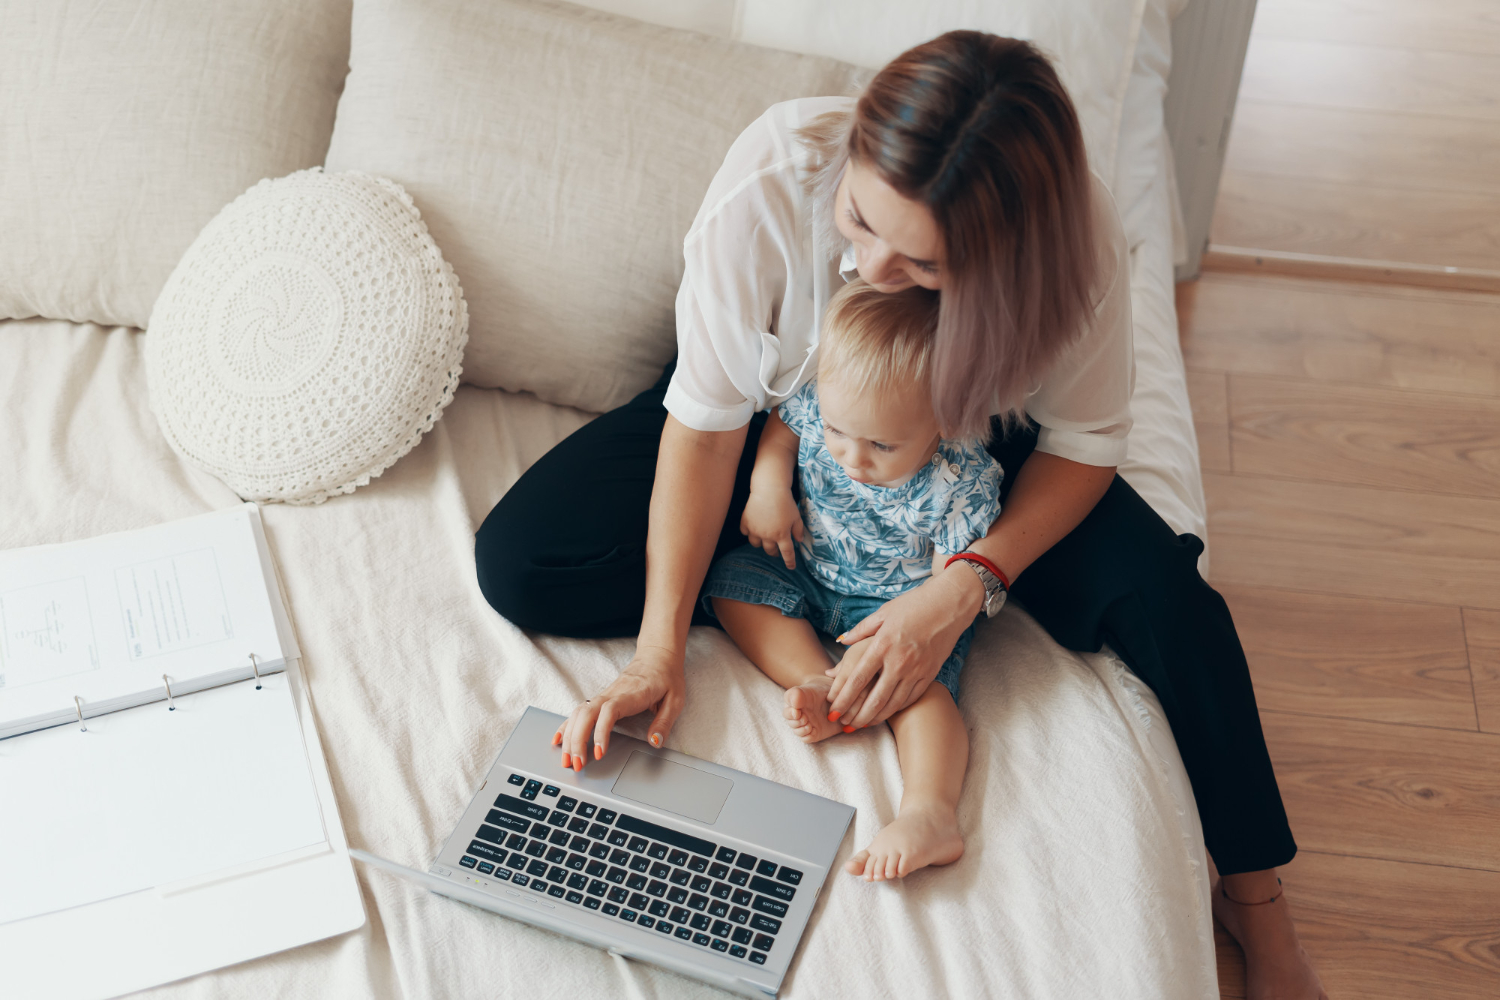 want to be a work from home mum? there are lots of freelance remote opportunities